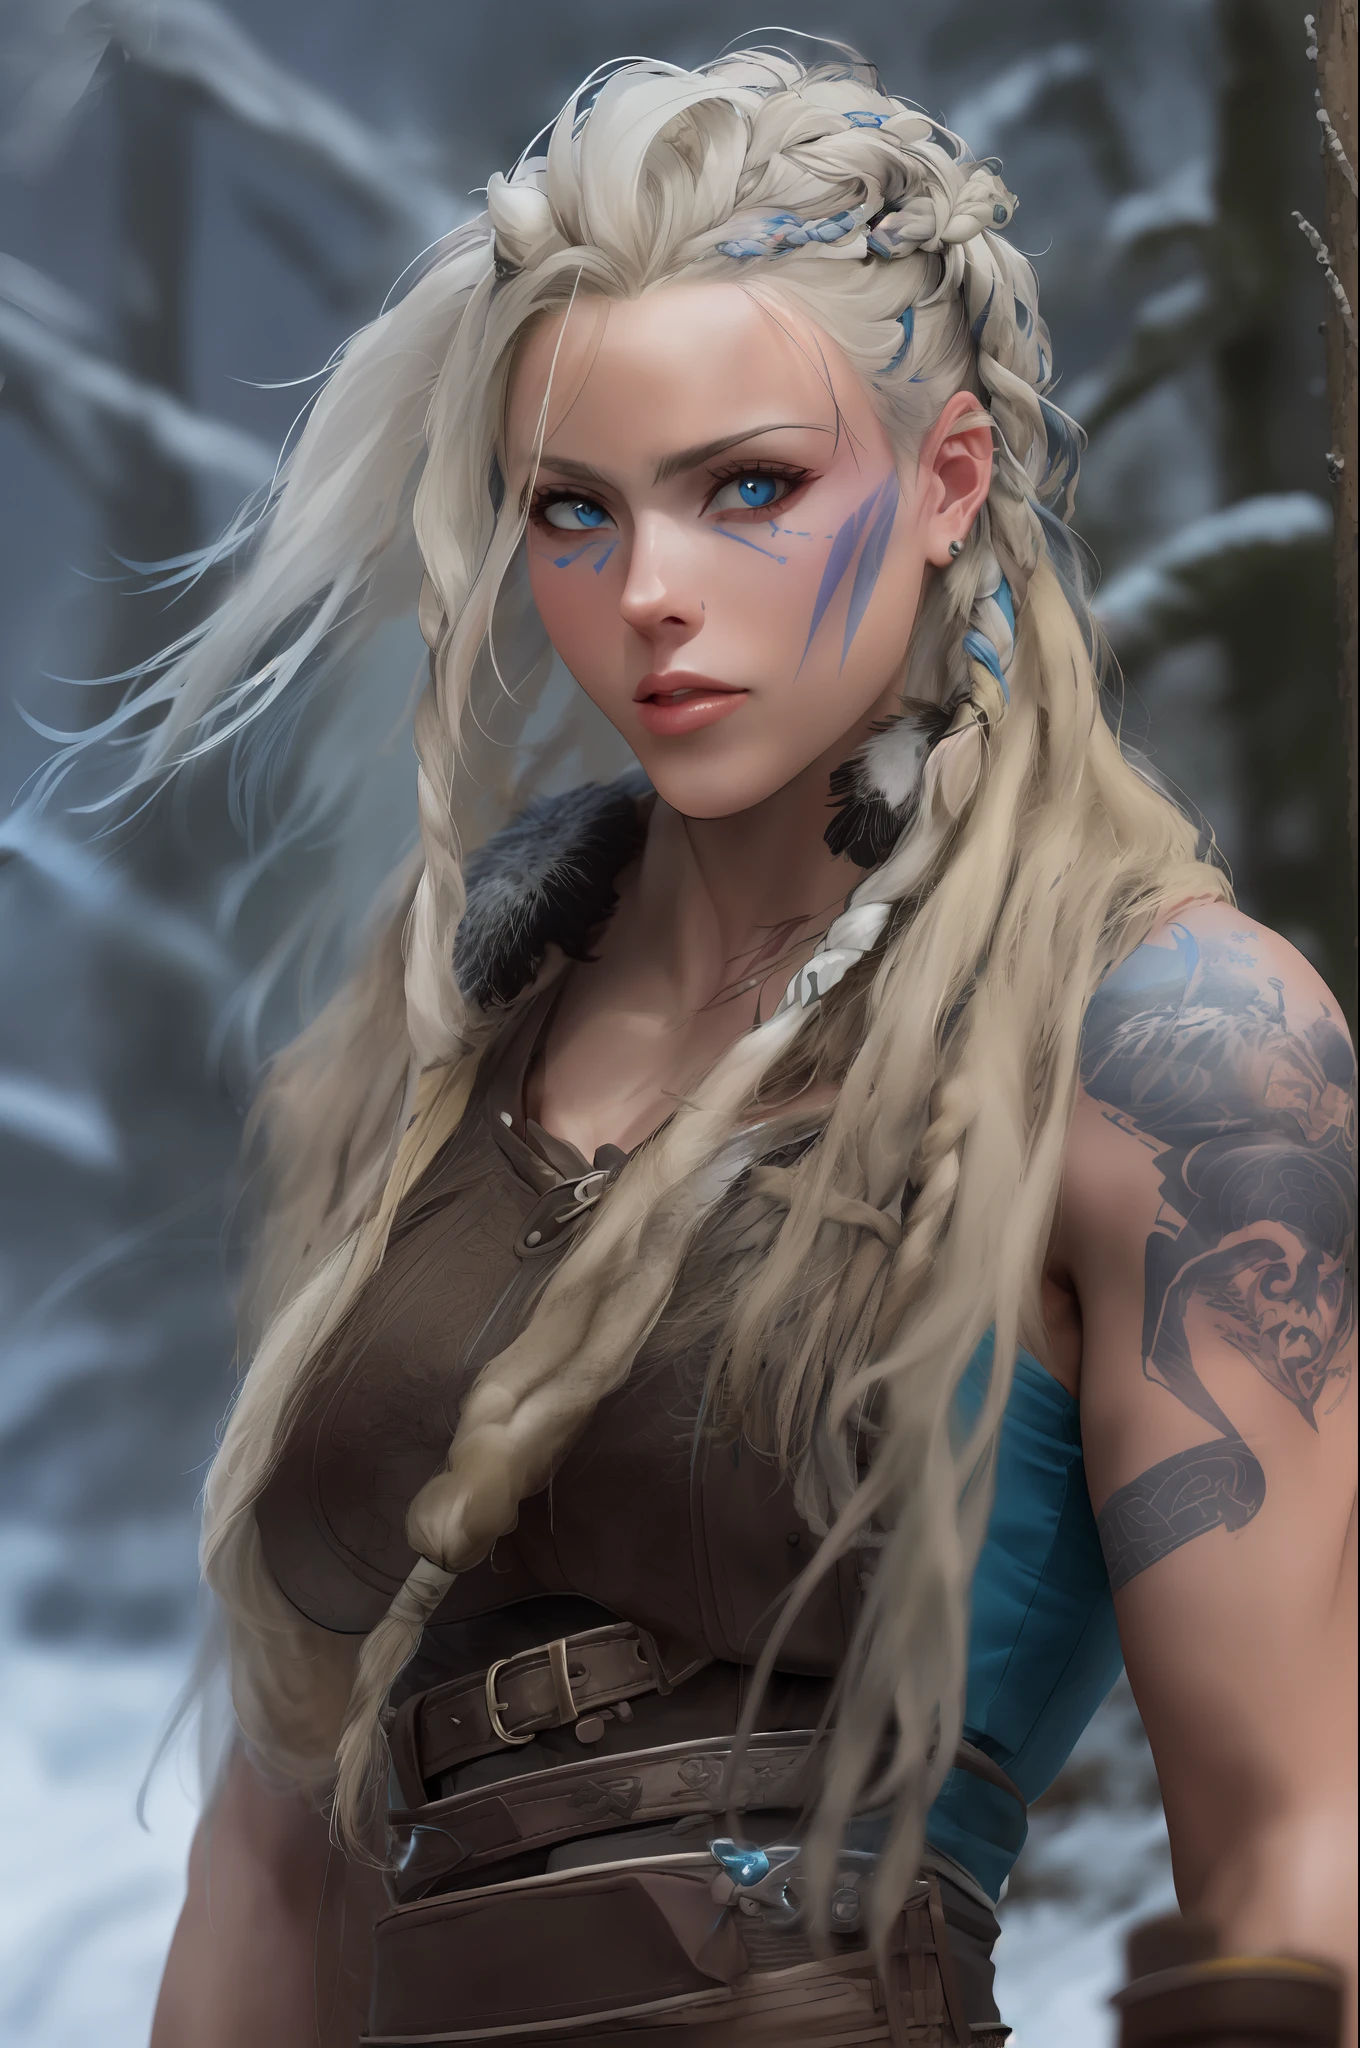 solo Female viking, (young:1.2), (muscular:1.2), fit, wearing brown furs and hides, (wearing furs:1.3) (blue norse tattoos:1.2), blue eyes, platinum blonde hair, (Dreadlocks:1.7), (Dreads:1.4), (Sideshave:1.6), warrior hair, Setting is a Scandinavian forest in winter, snow, bare arms, exposed naval, (abs:1.2). Highly detailed, norse, berserker, arm muscles, leg muscles, (bulky:1.2), leather straps, (large breasts:1.3), waist up, wide waist, stocky, (tall:1.4)